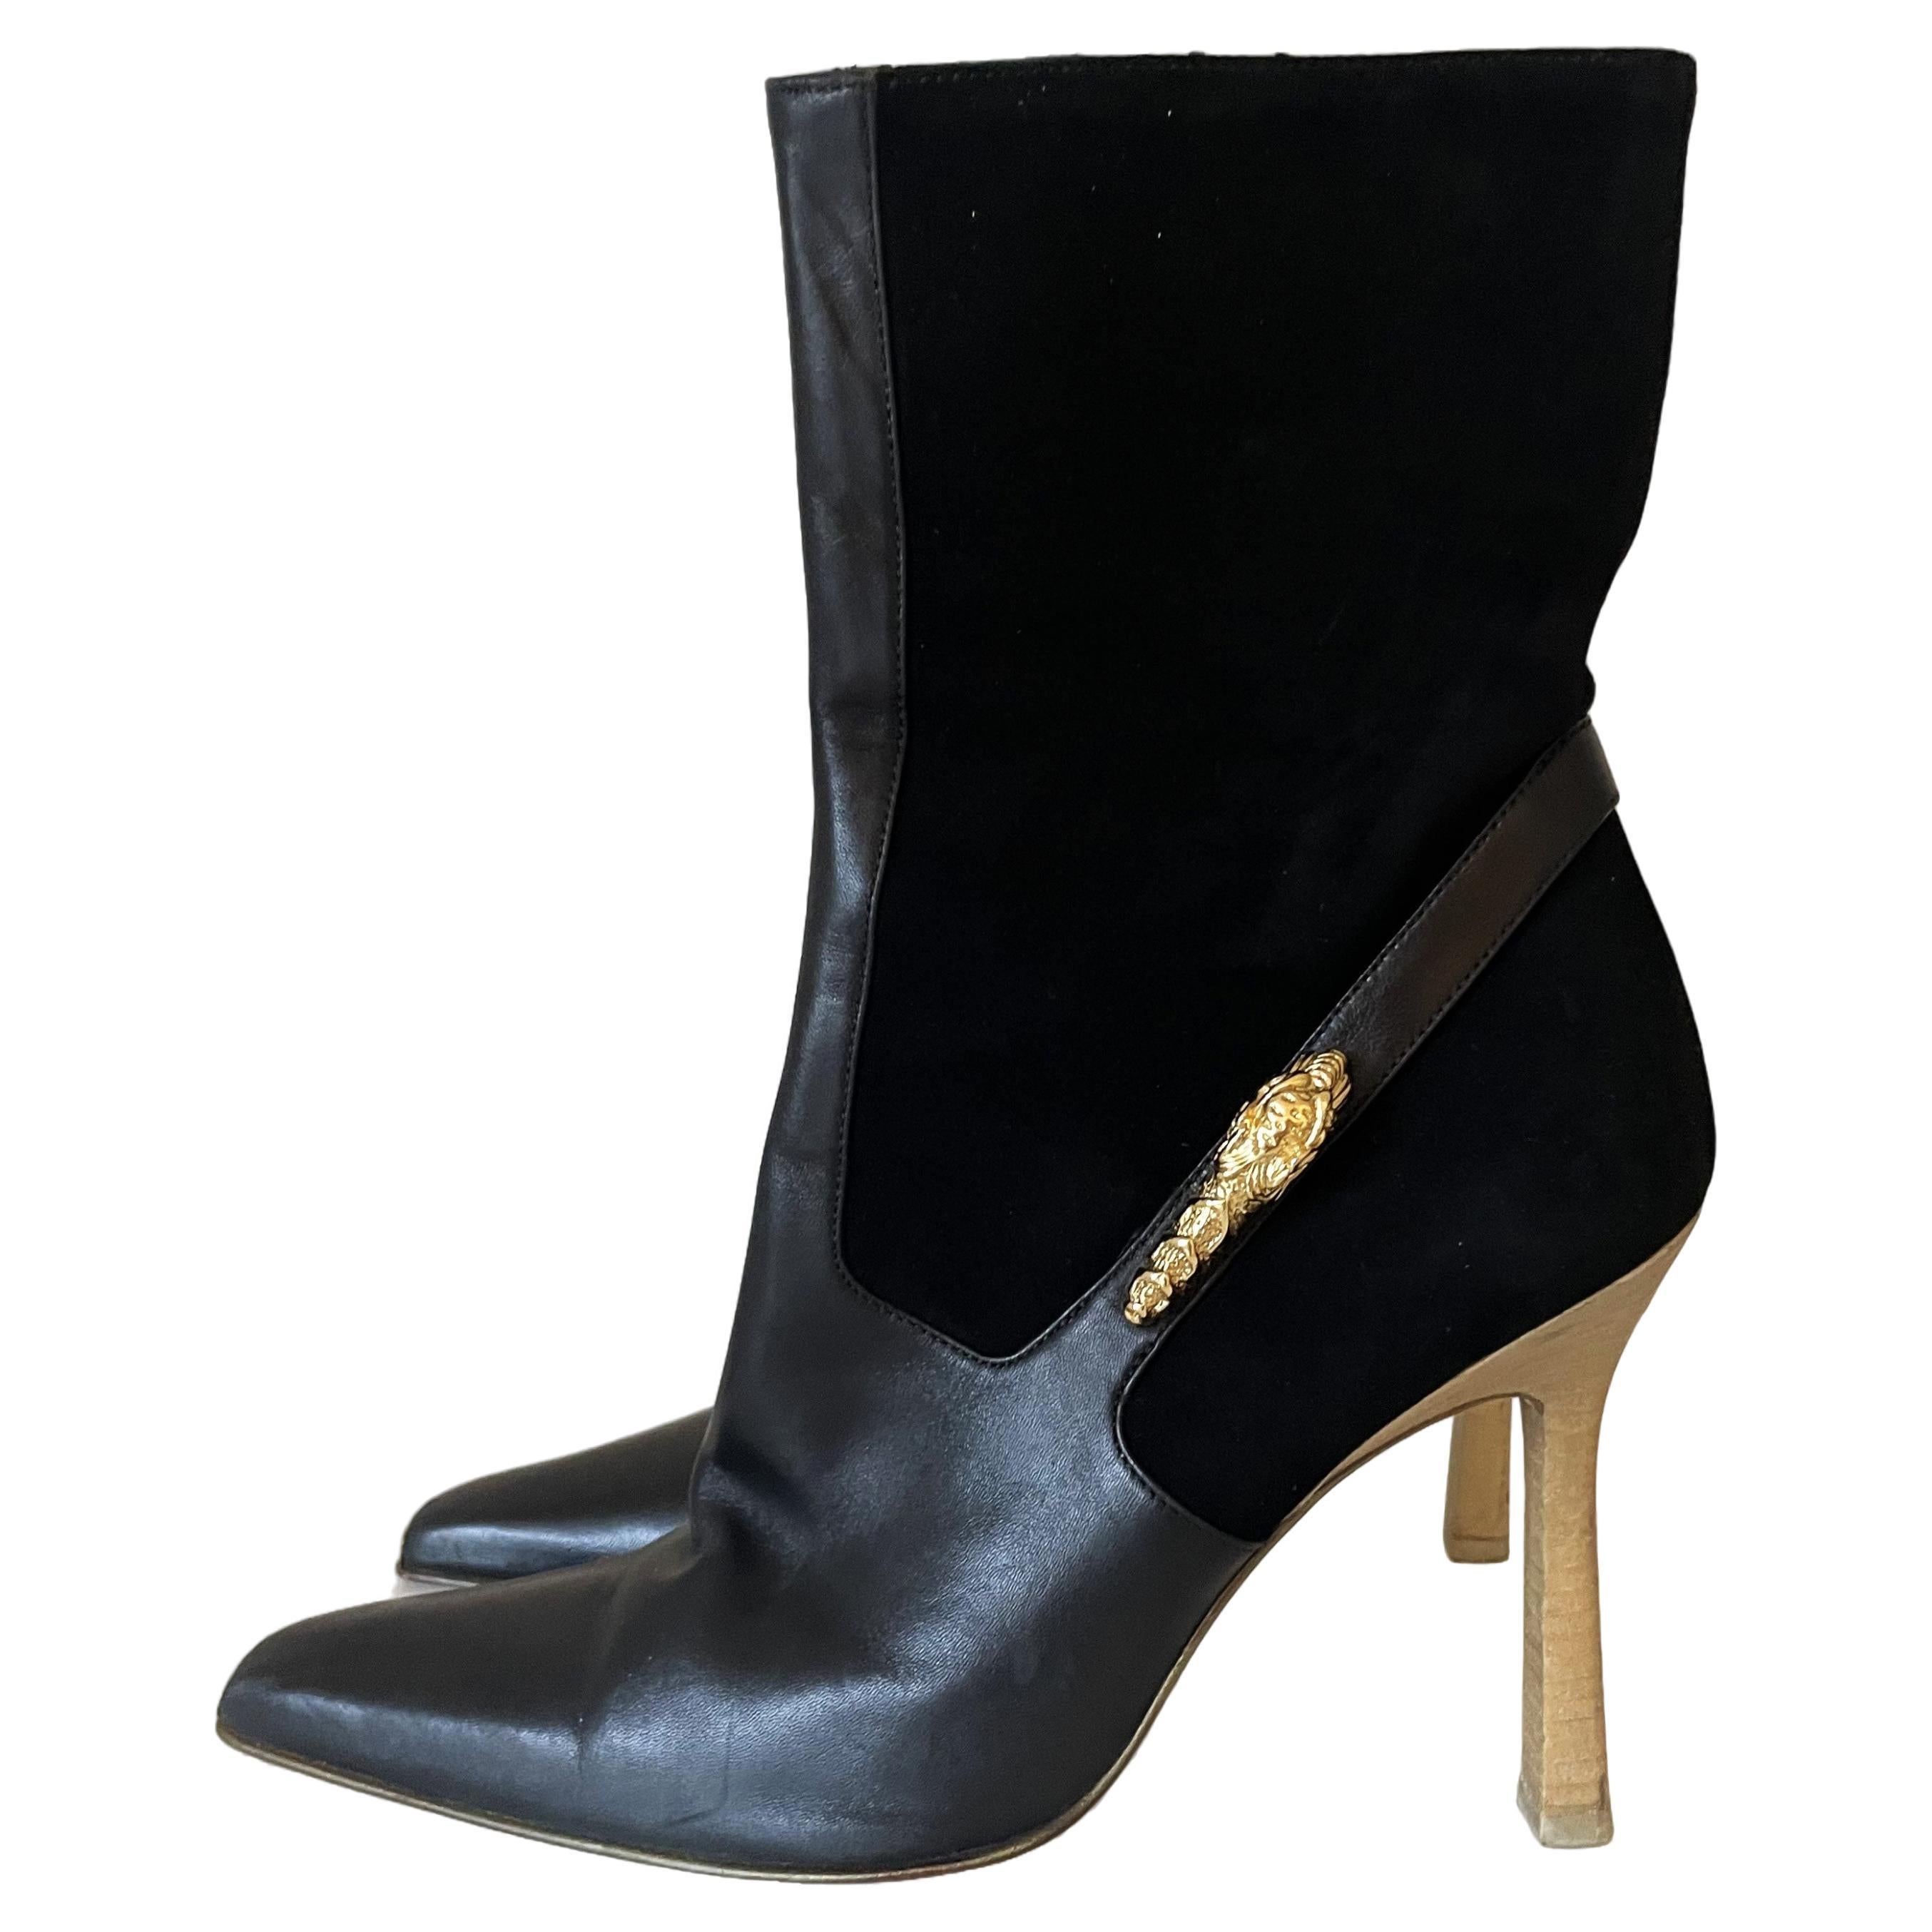 Gucci Rare Black Suede Leather High Heel Ankle Boots Gold Metal Panther en vente